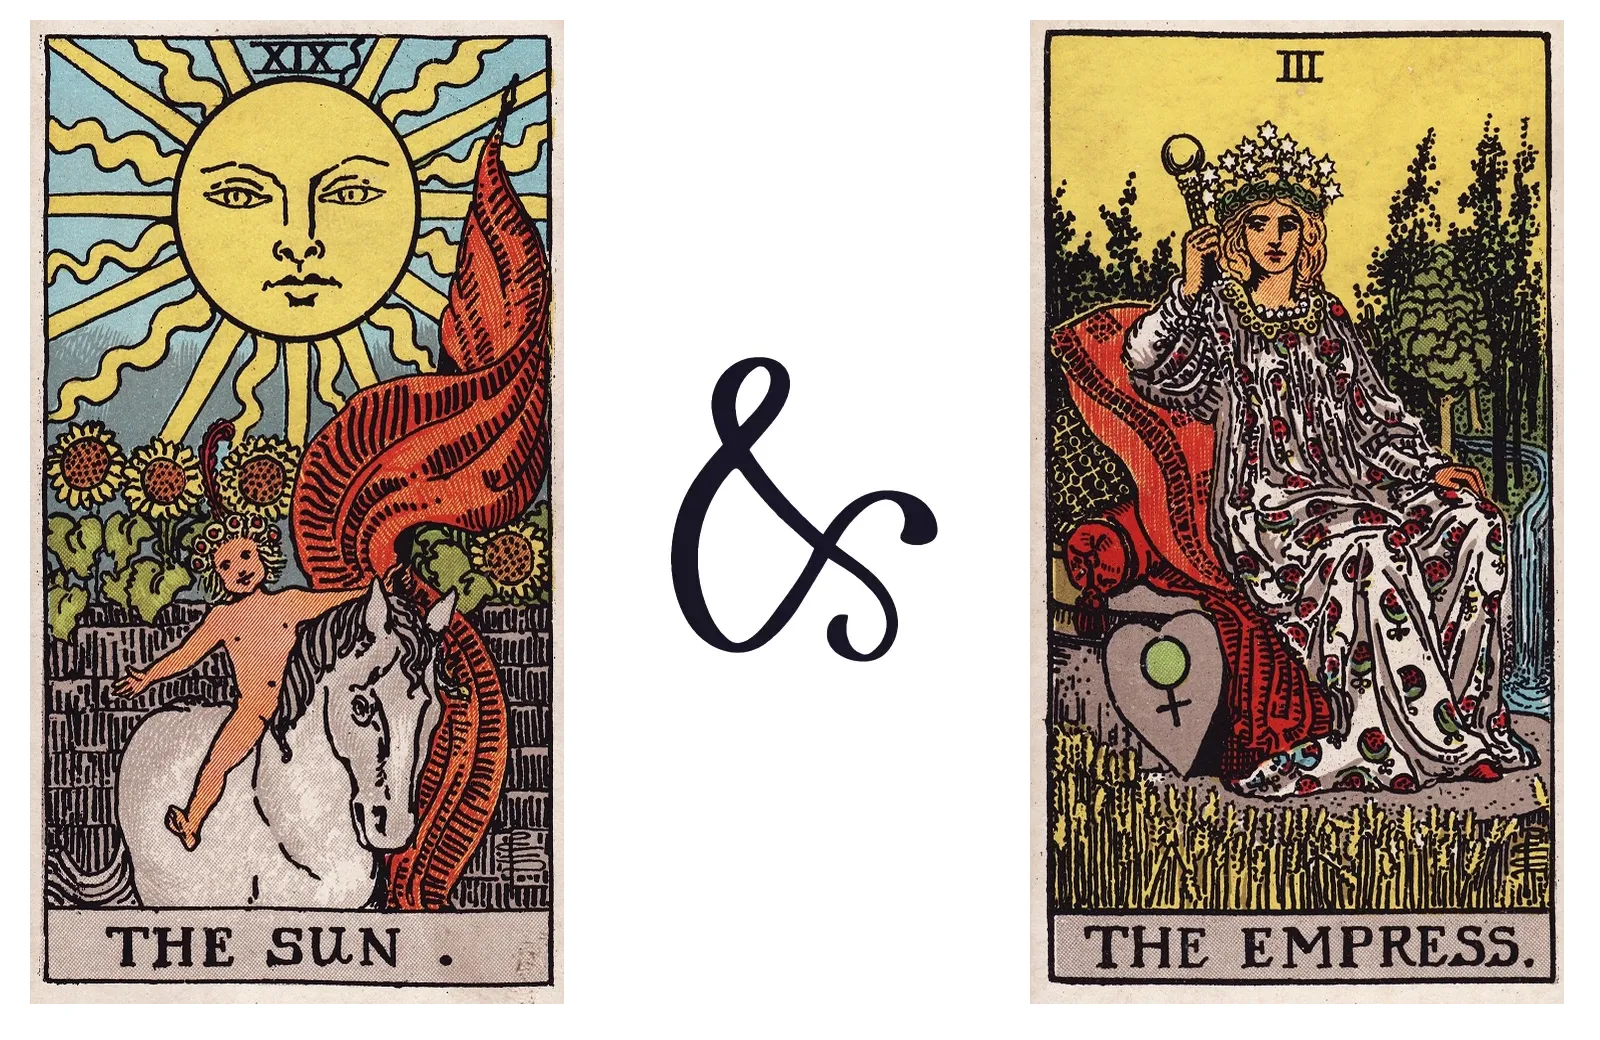 The Sun and The Empress